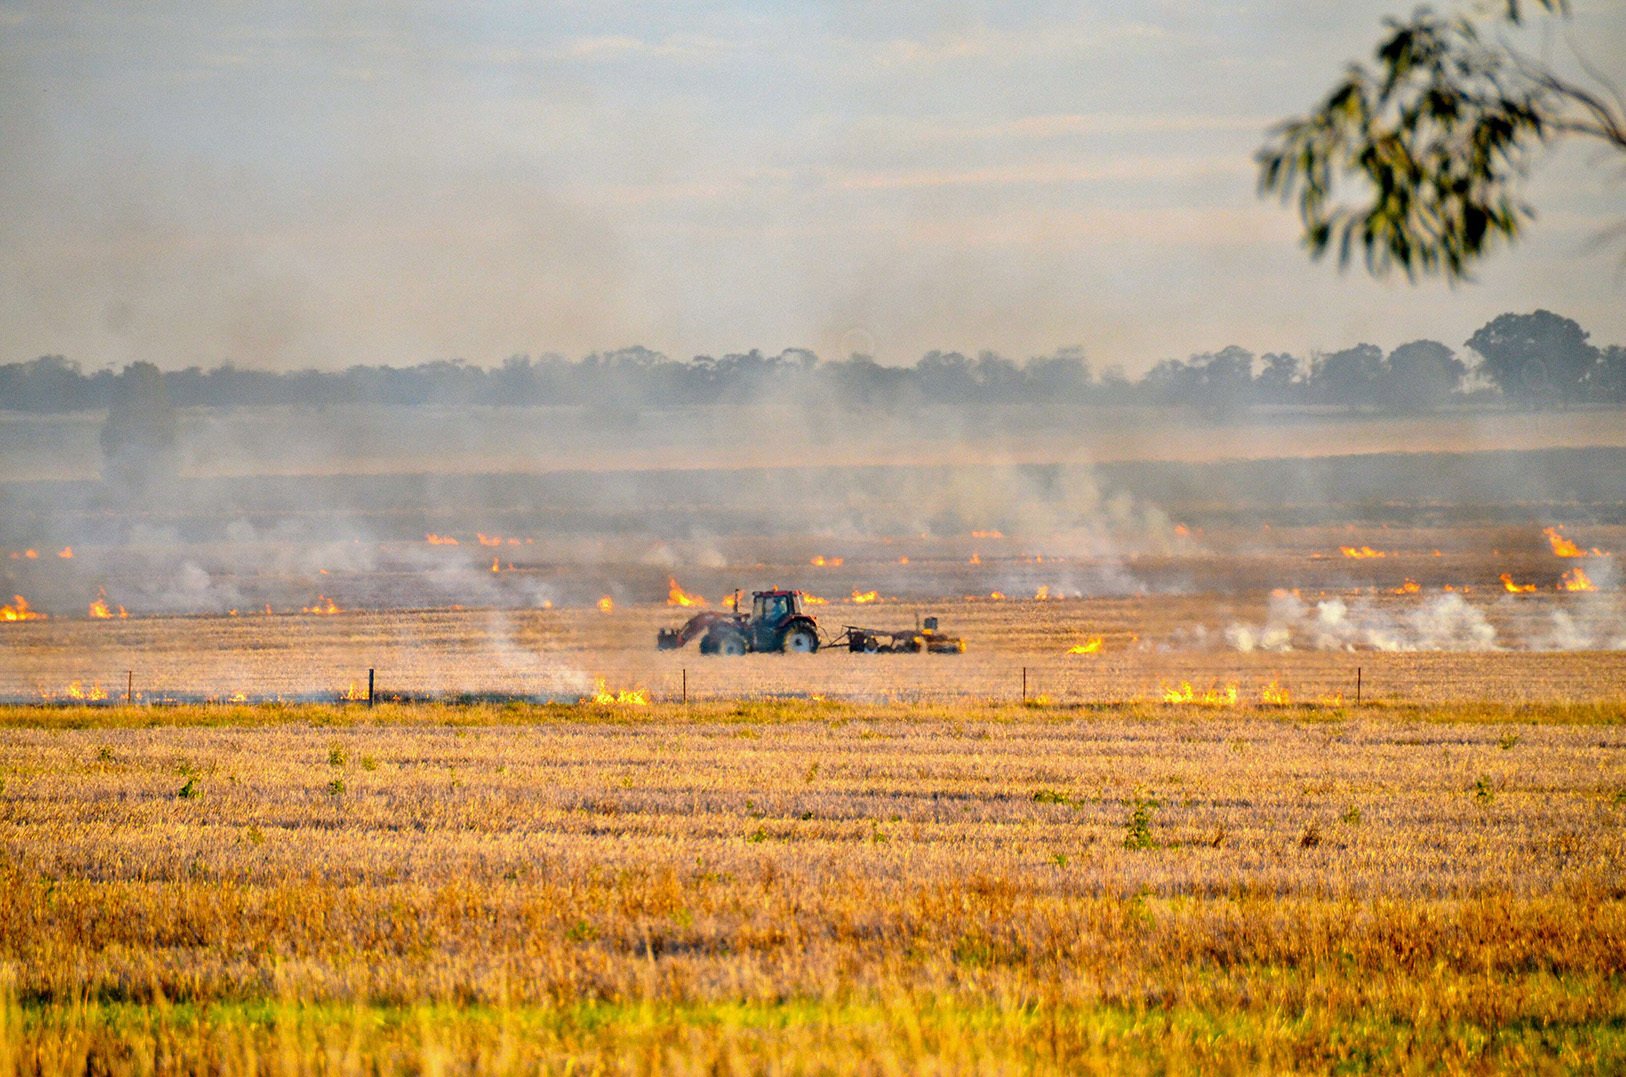 Crop field on fire with tractor